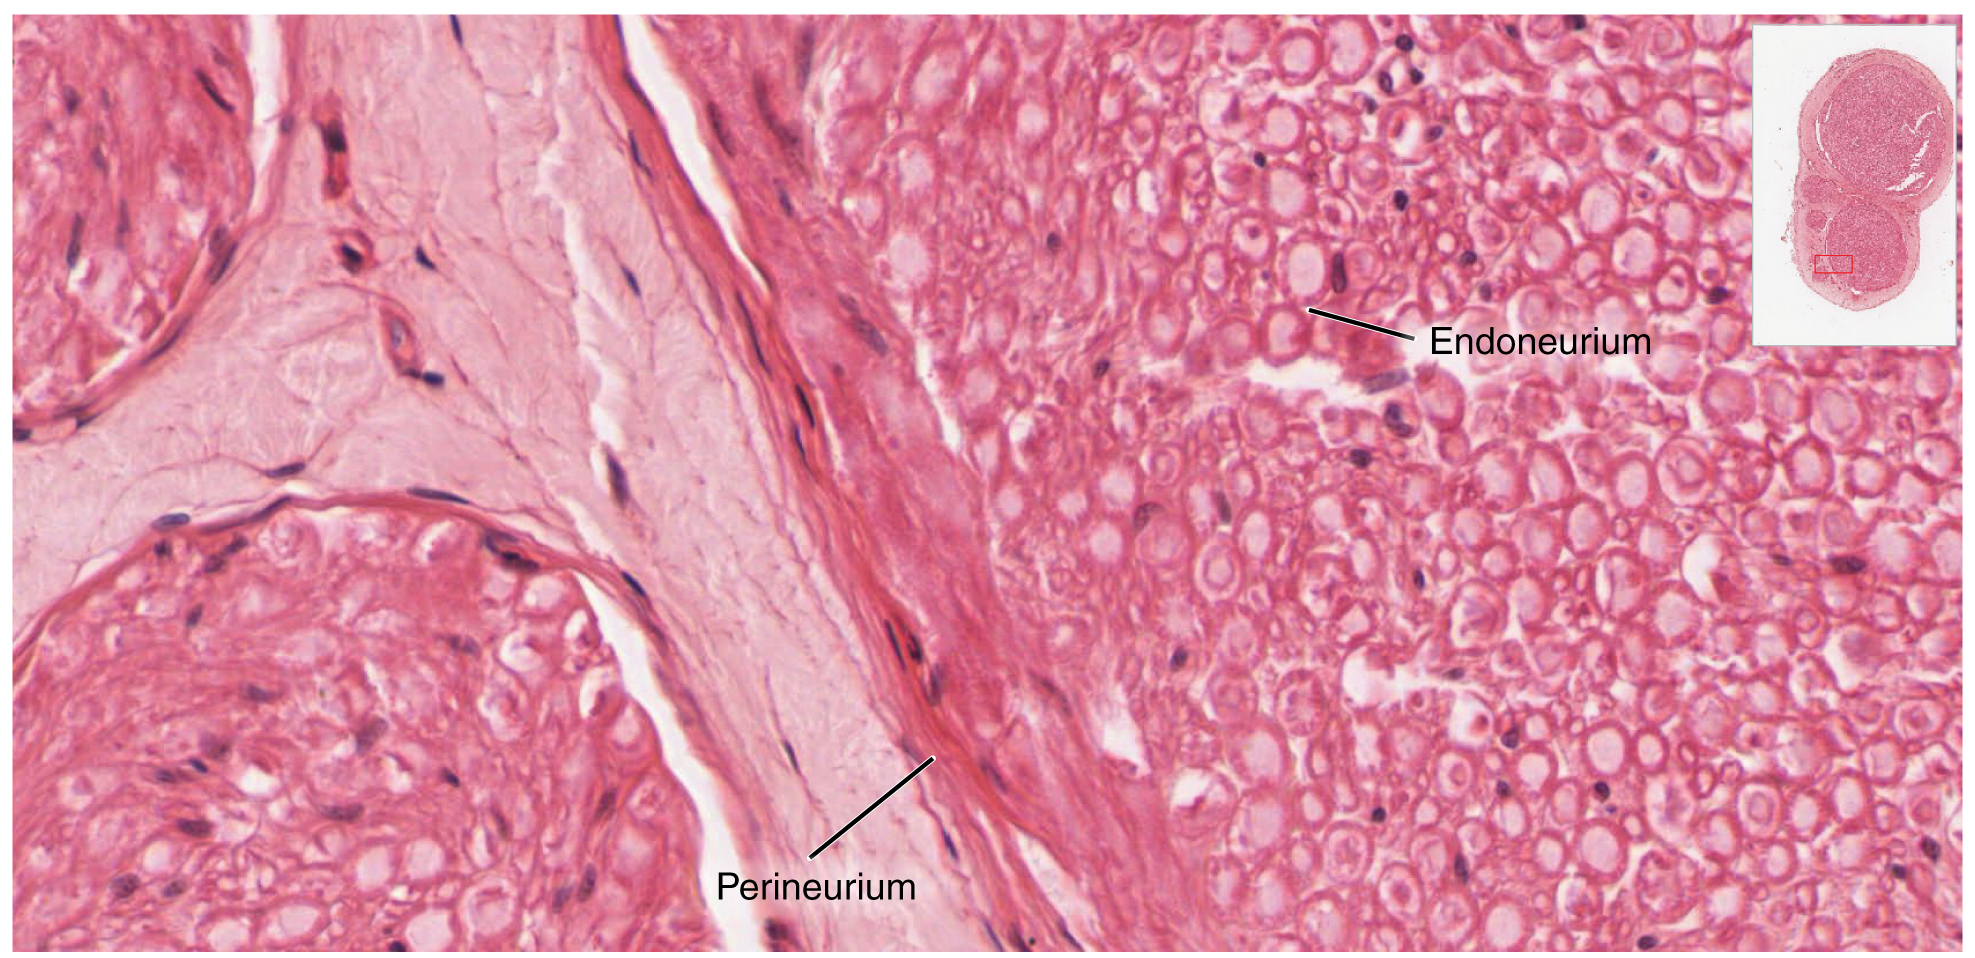 This micrograph shows a magnified view of the nerve. The perineurium and the endoneurium are labeled.